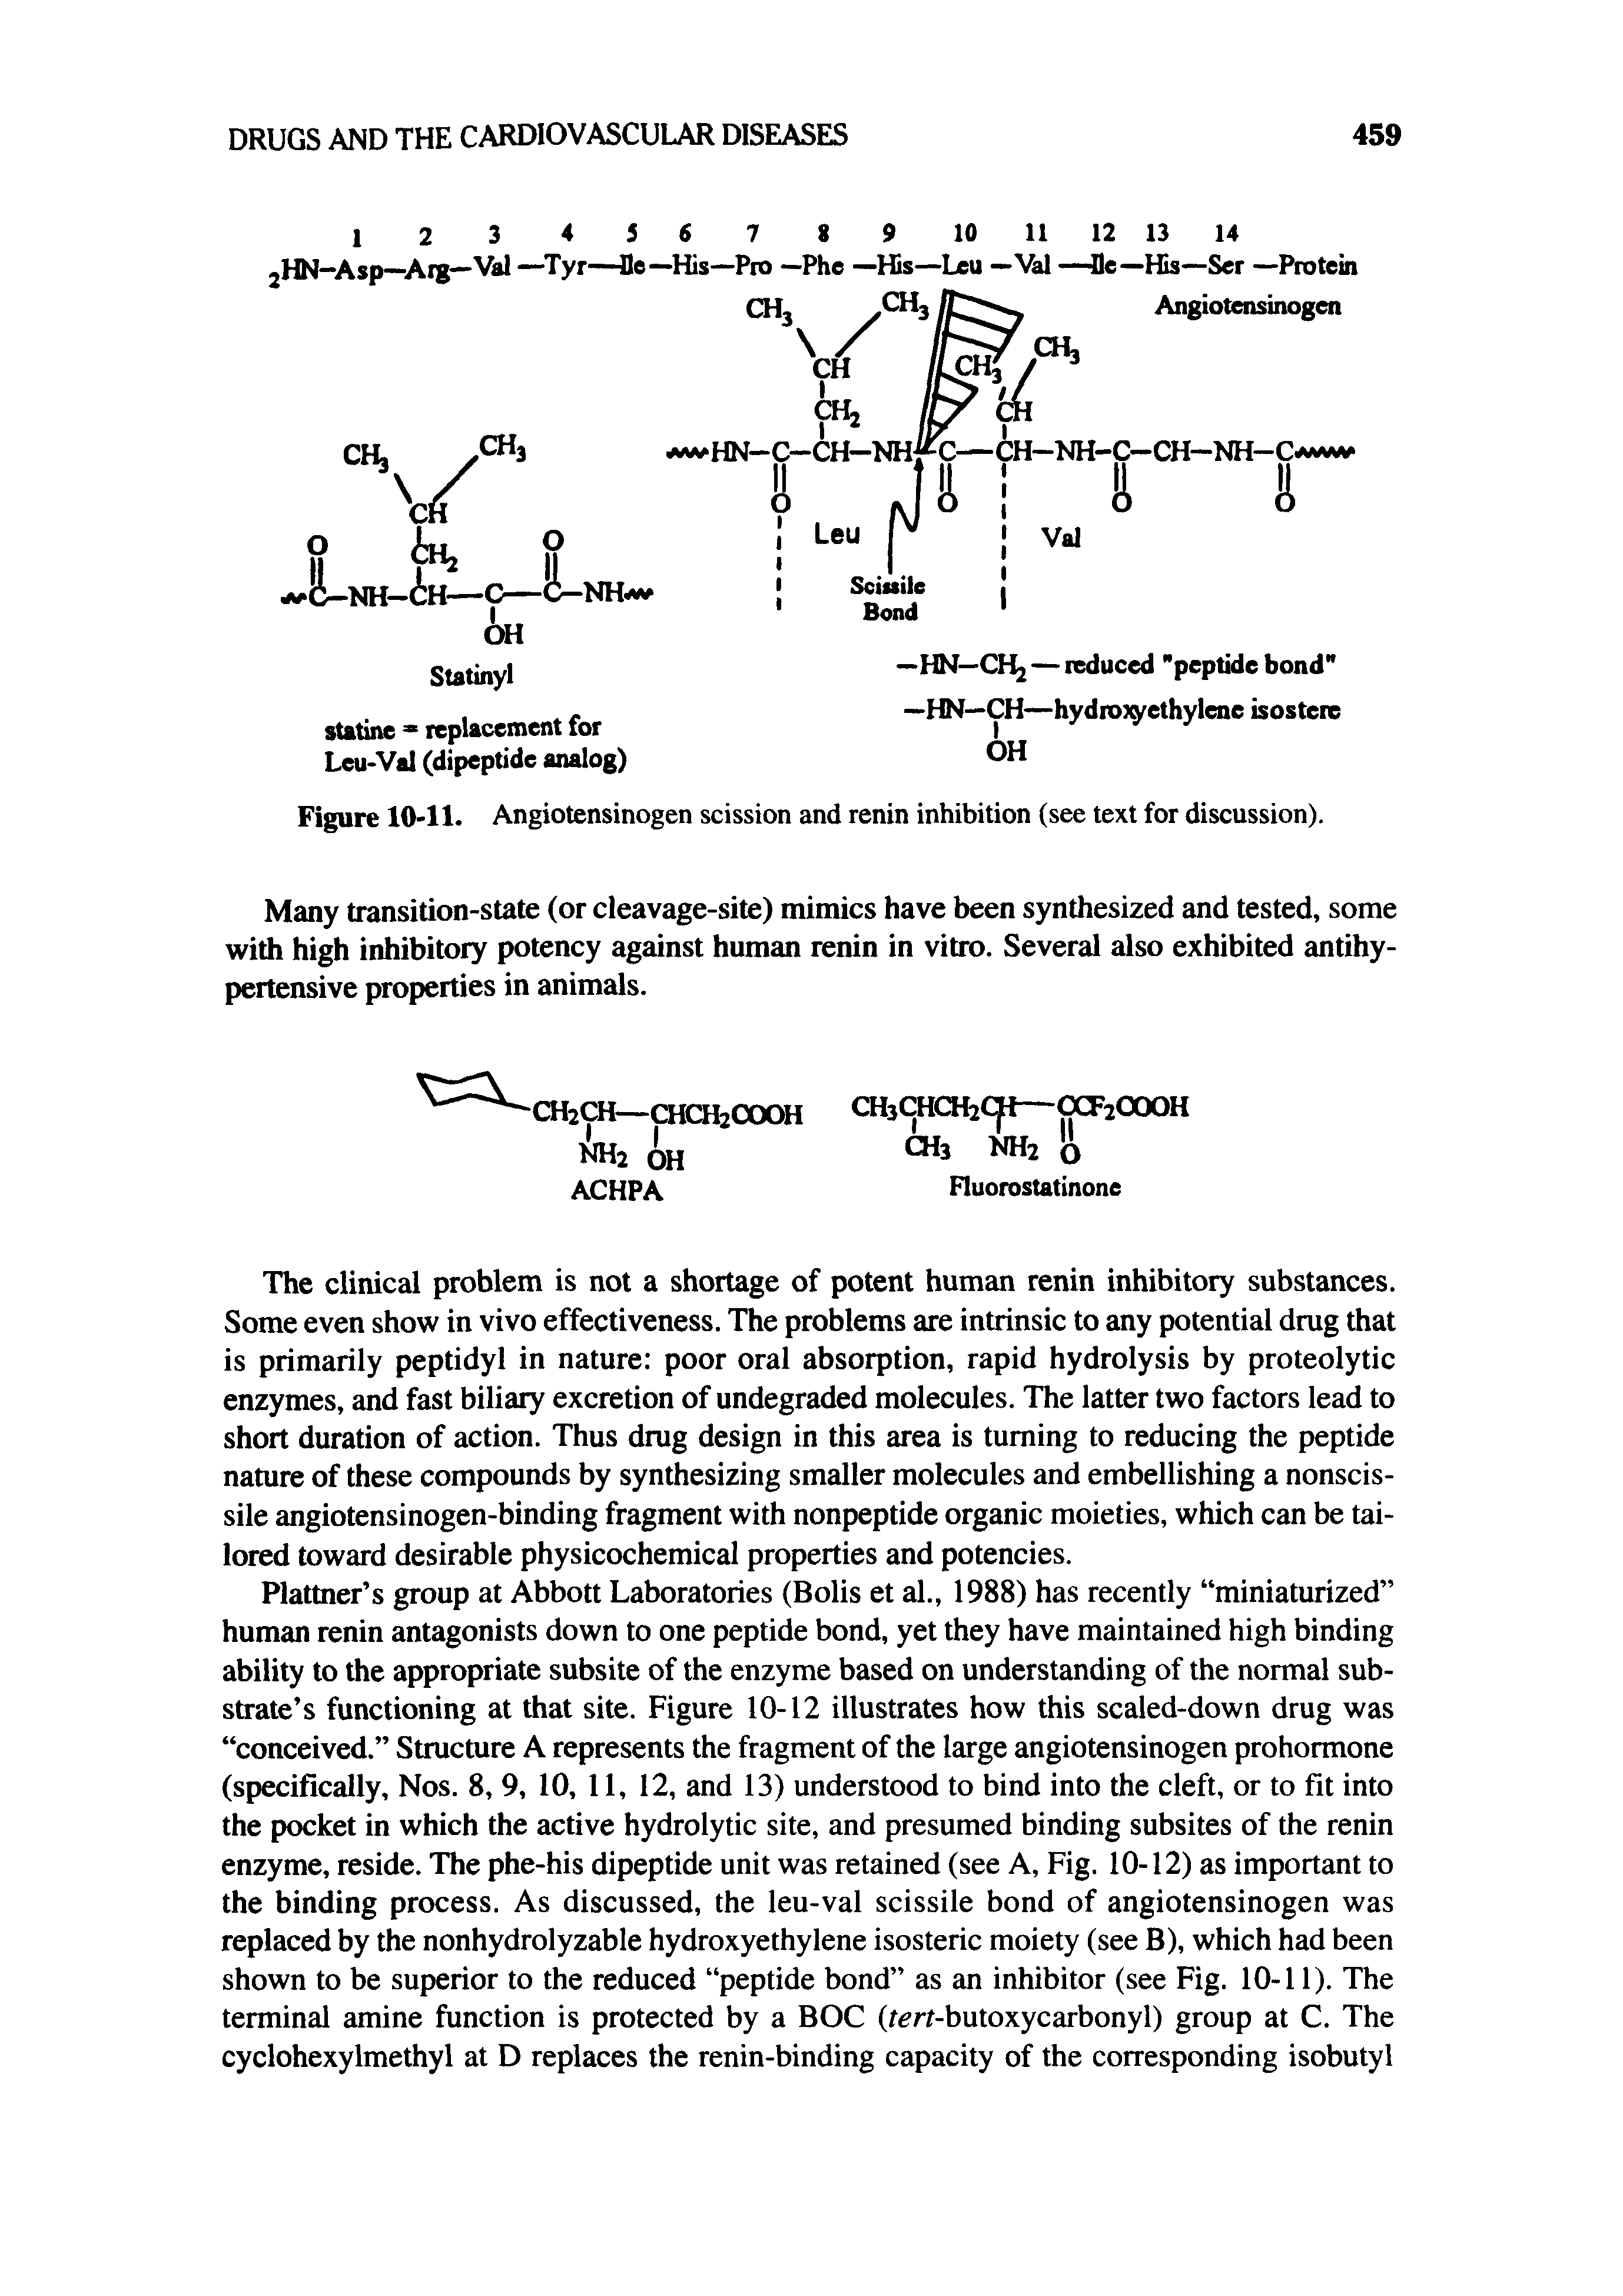 Figure 10-11. Angiotensinogen scission and renin inhibition (see text for discussion).